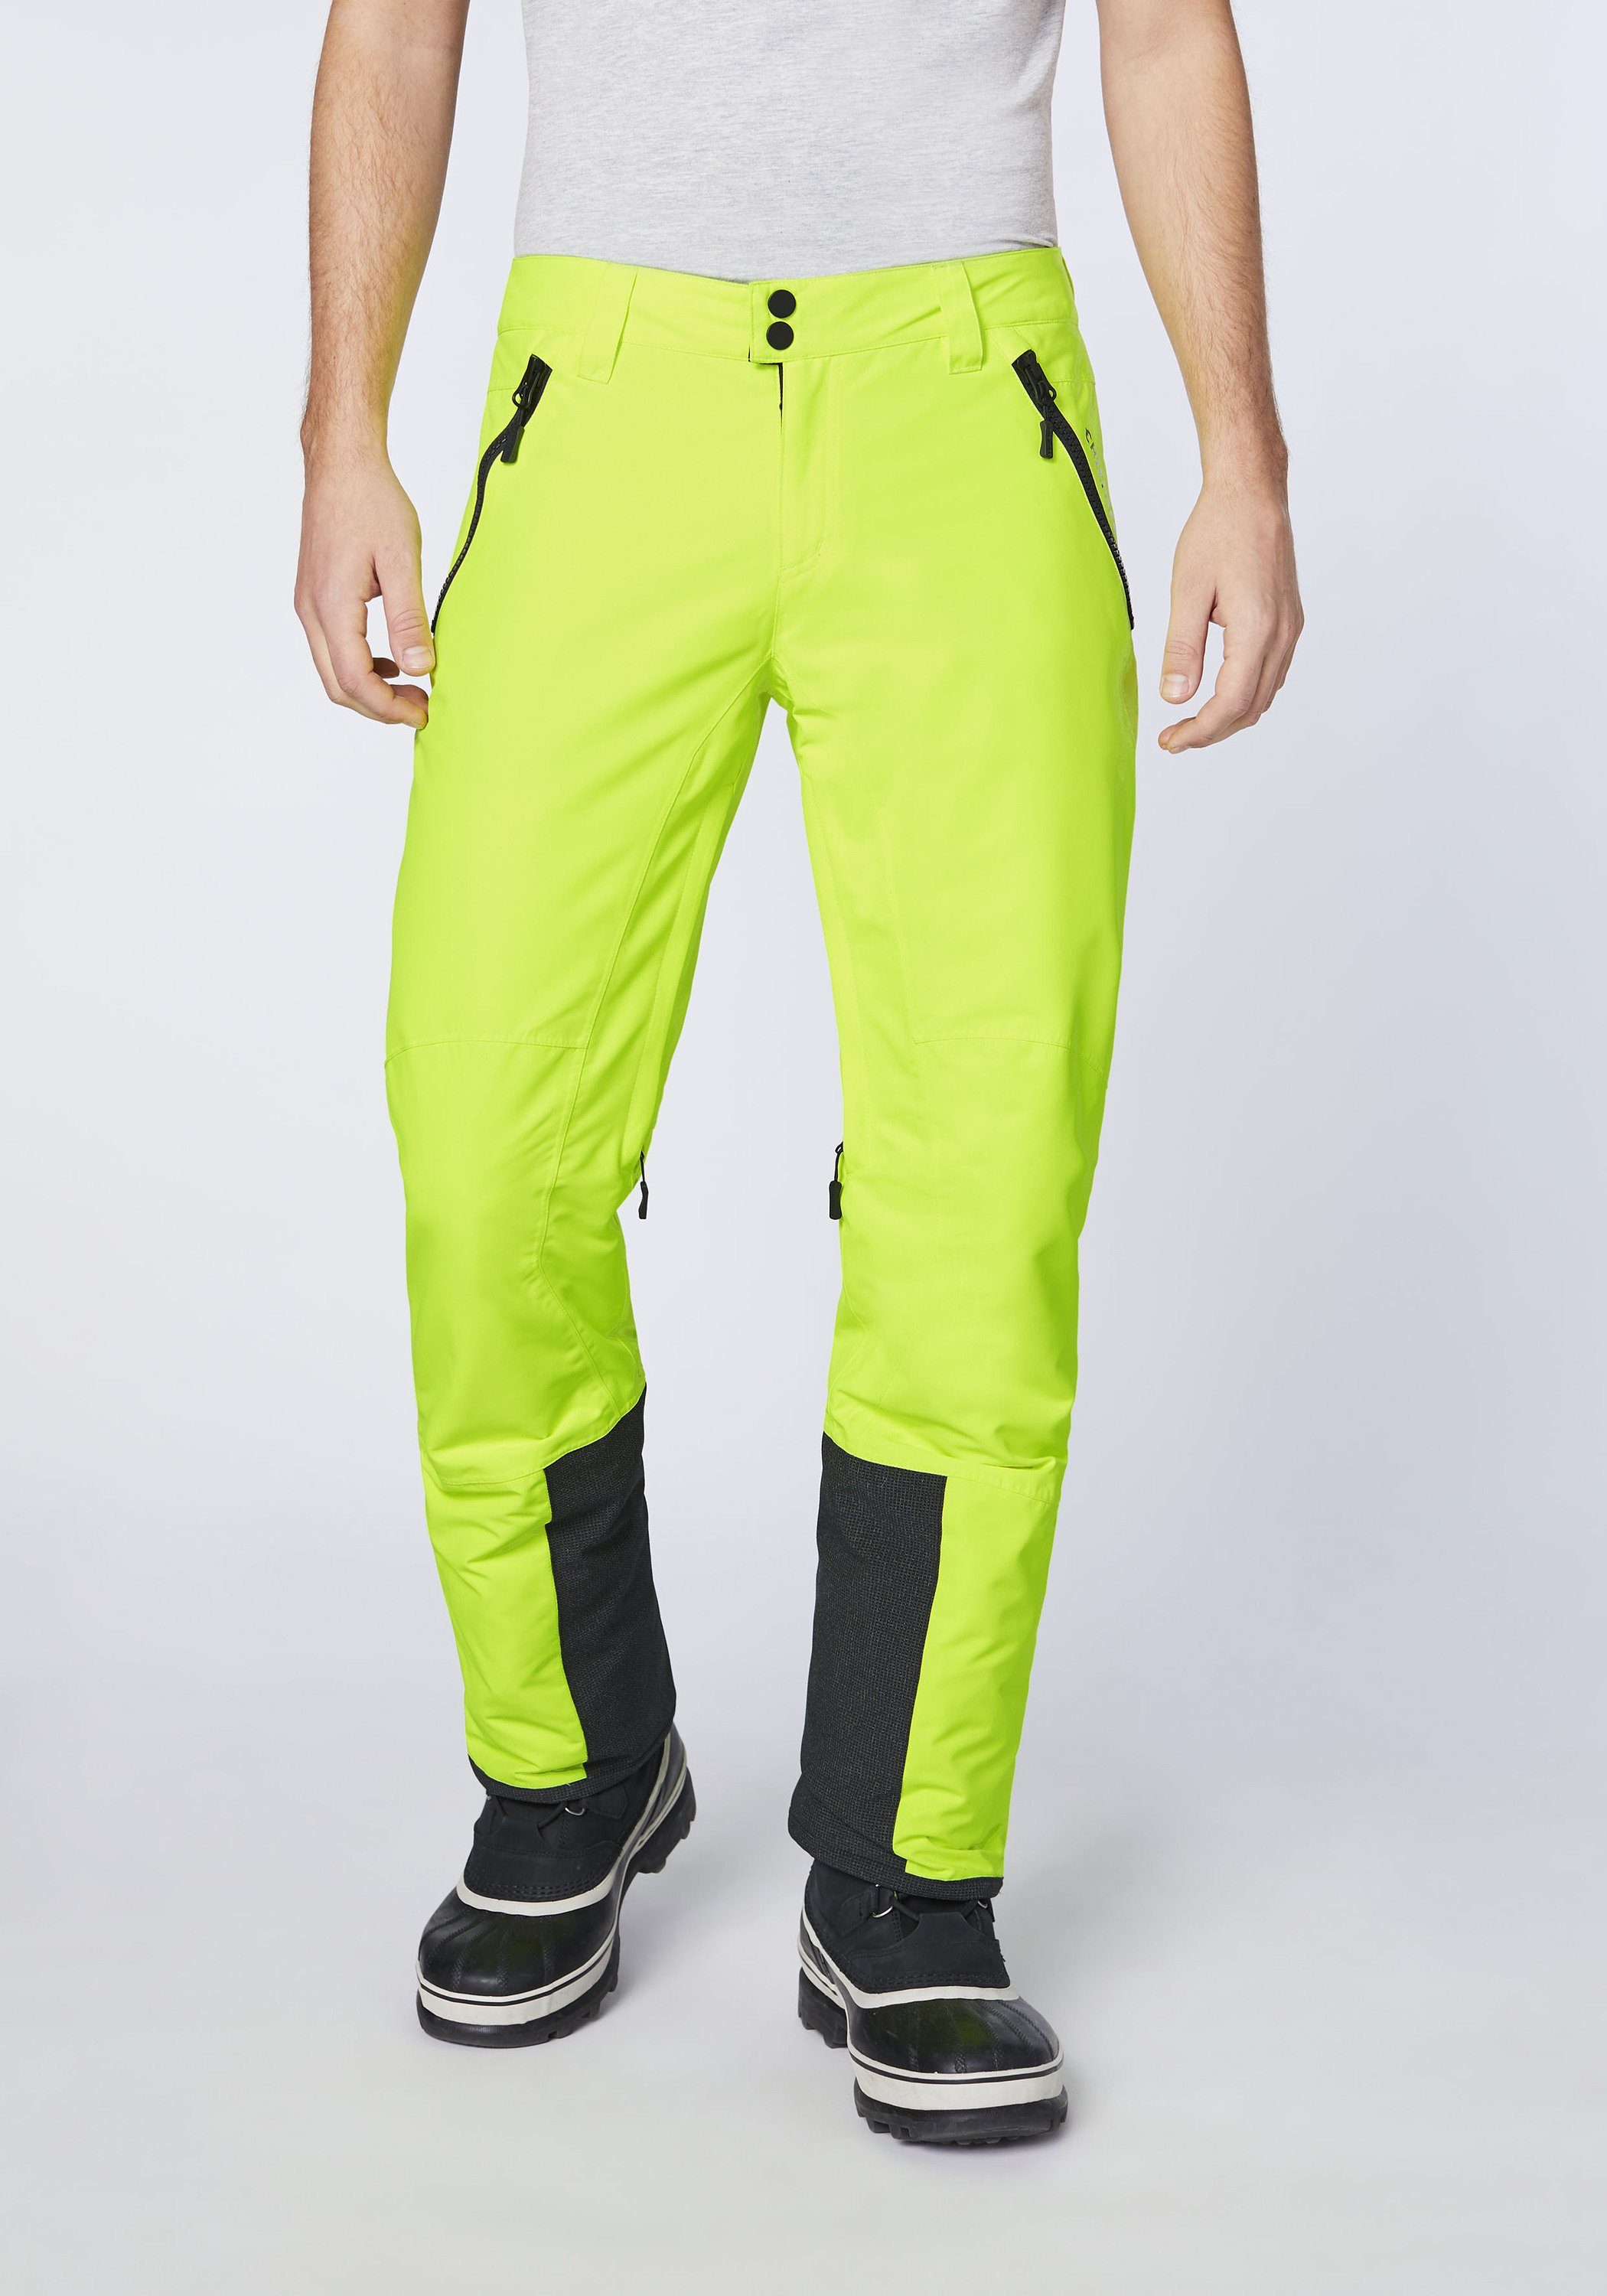 (1-tlg) Chiemsee Safety Sporthose Yellow mit Schneefang